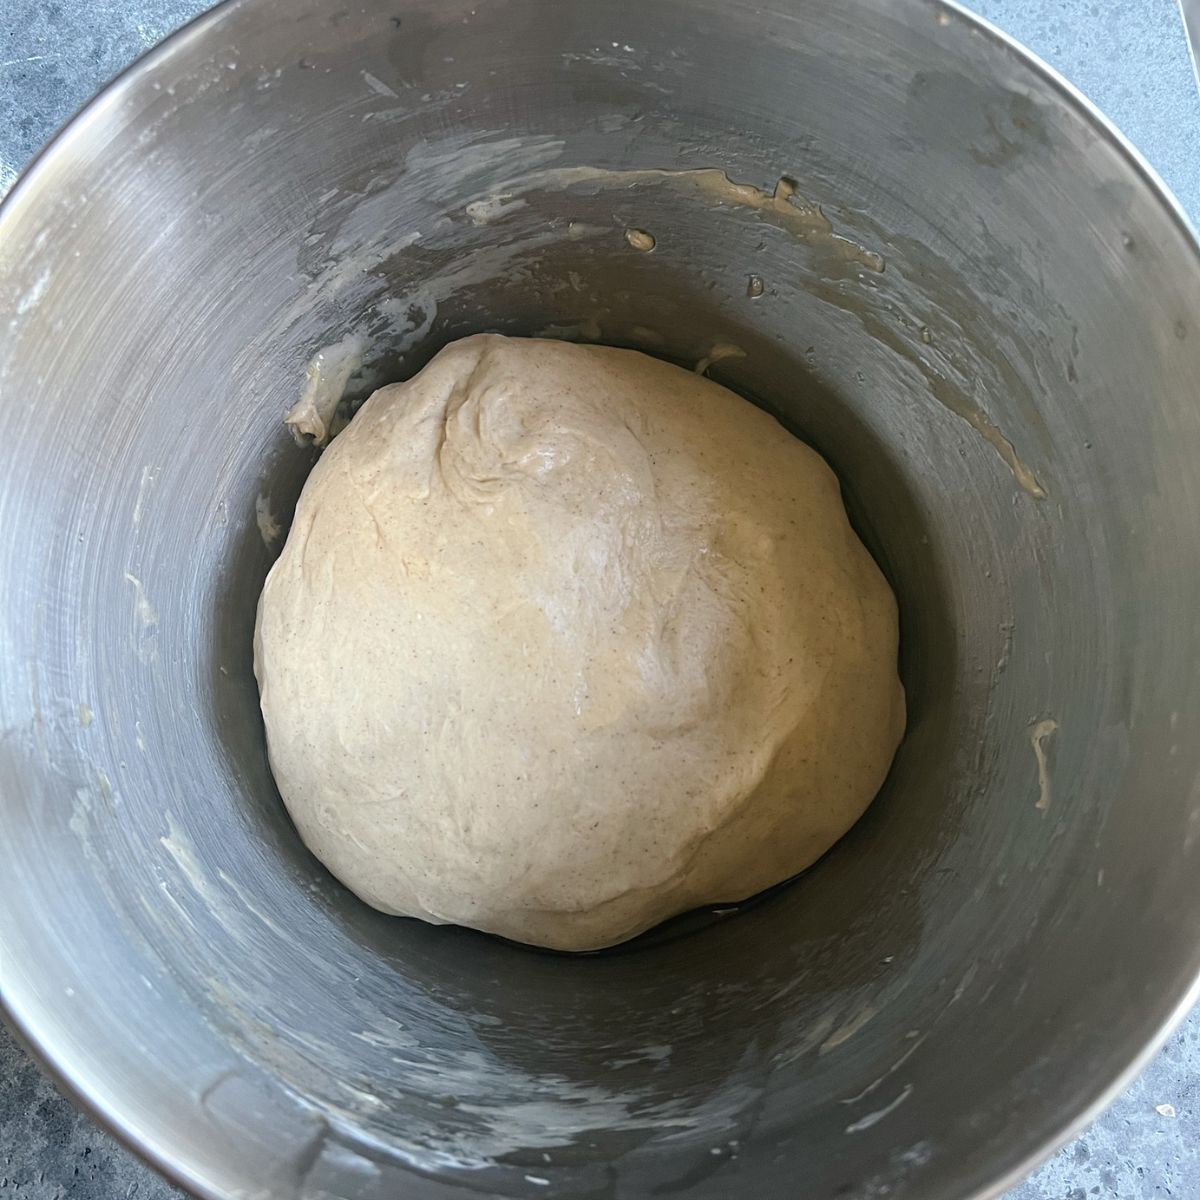 A ball of cinnamon roll dough in a mixing bowl.